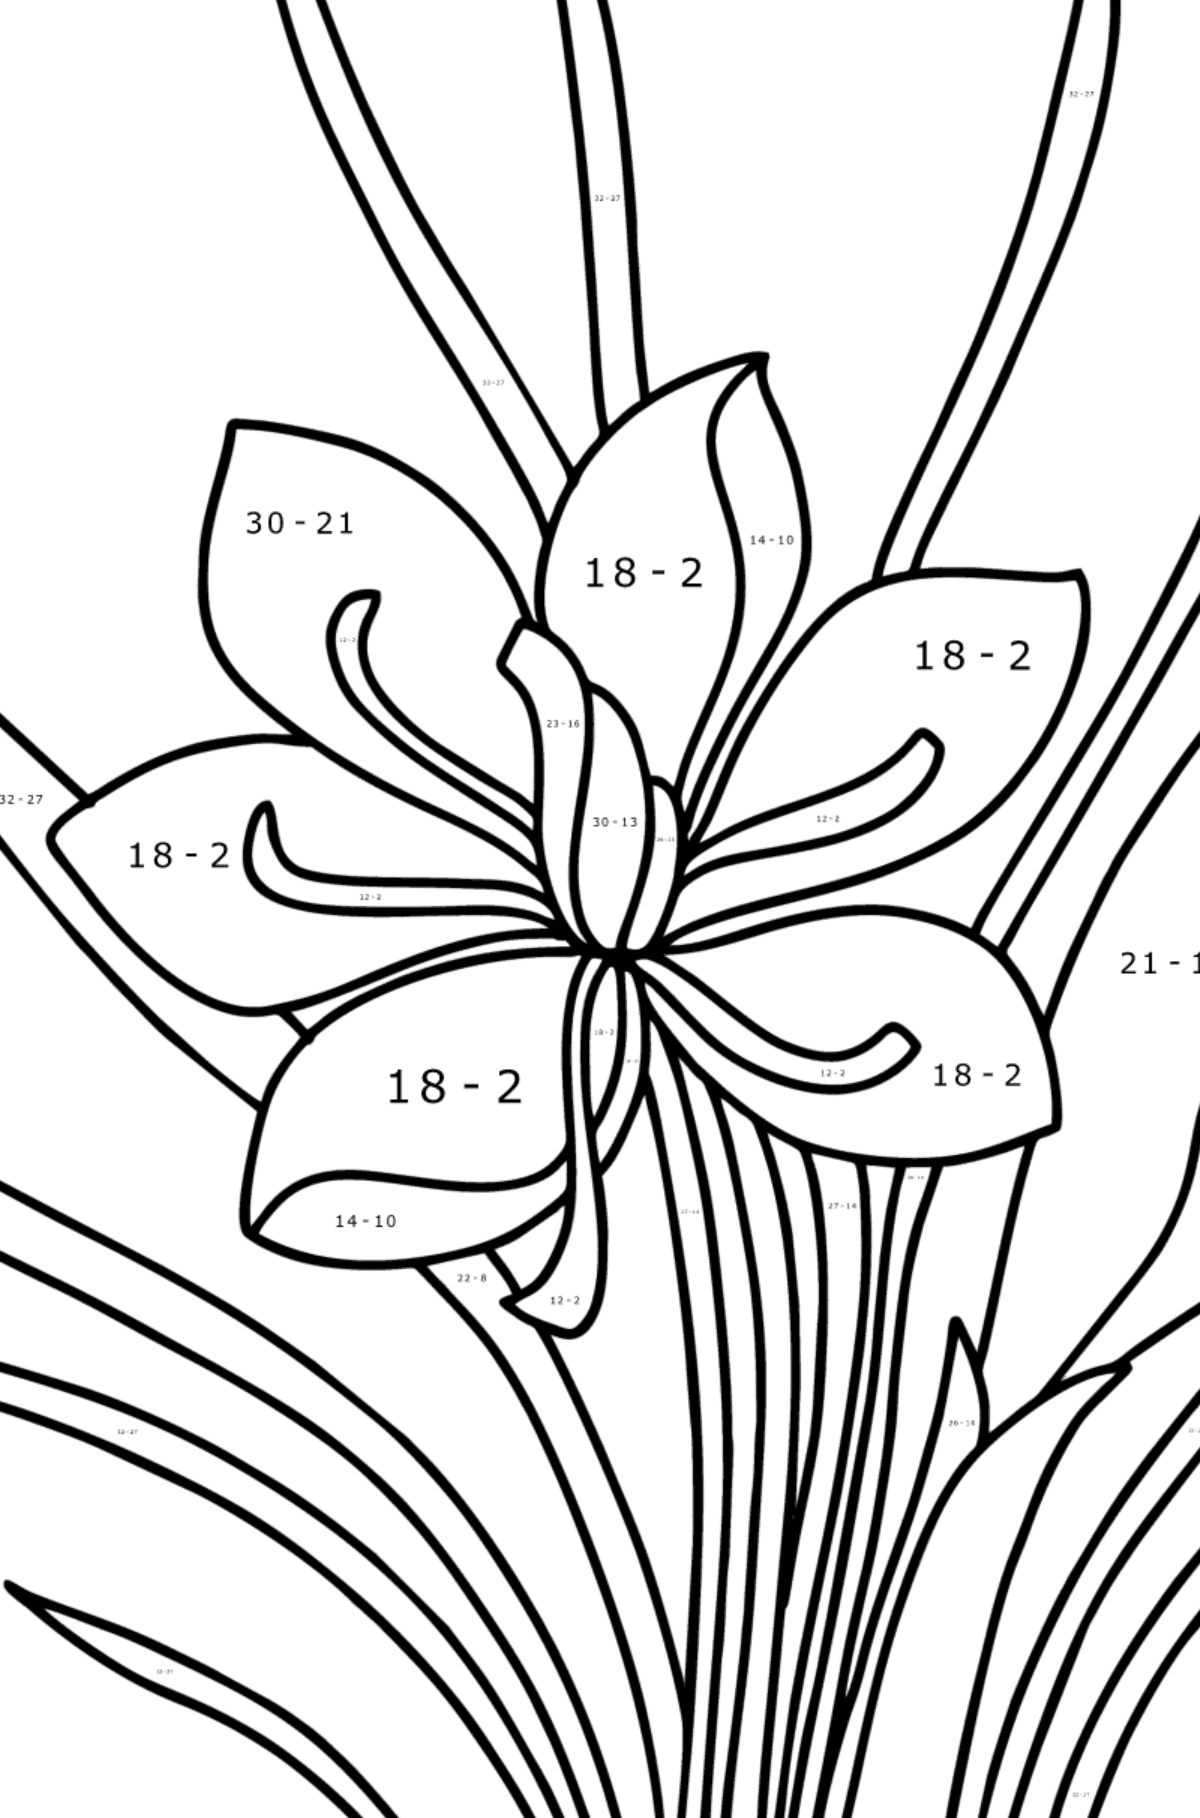 Crocus coloring page - Math Coloring - Subtraction for Kids